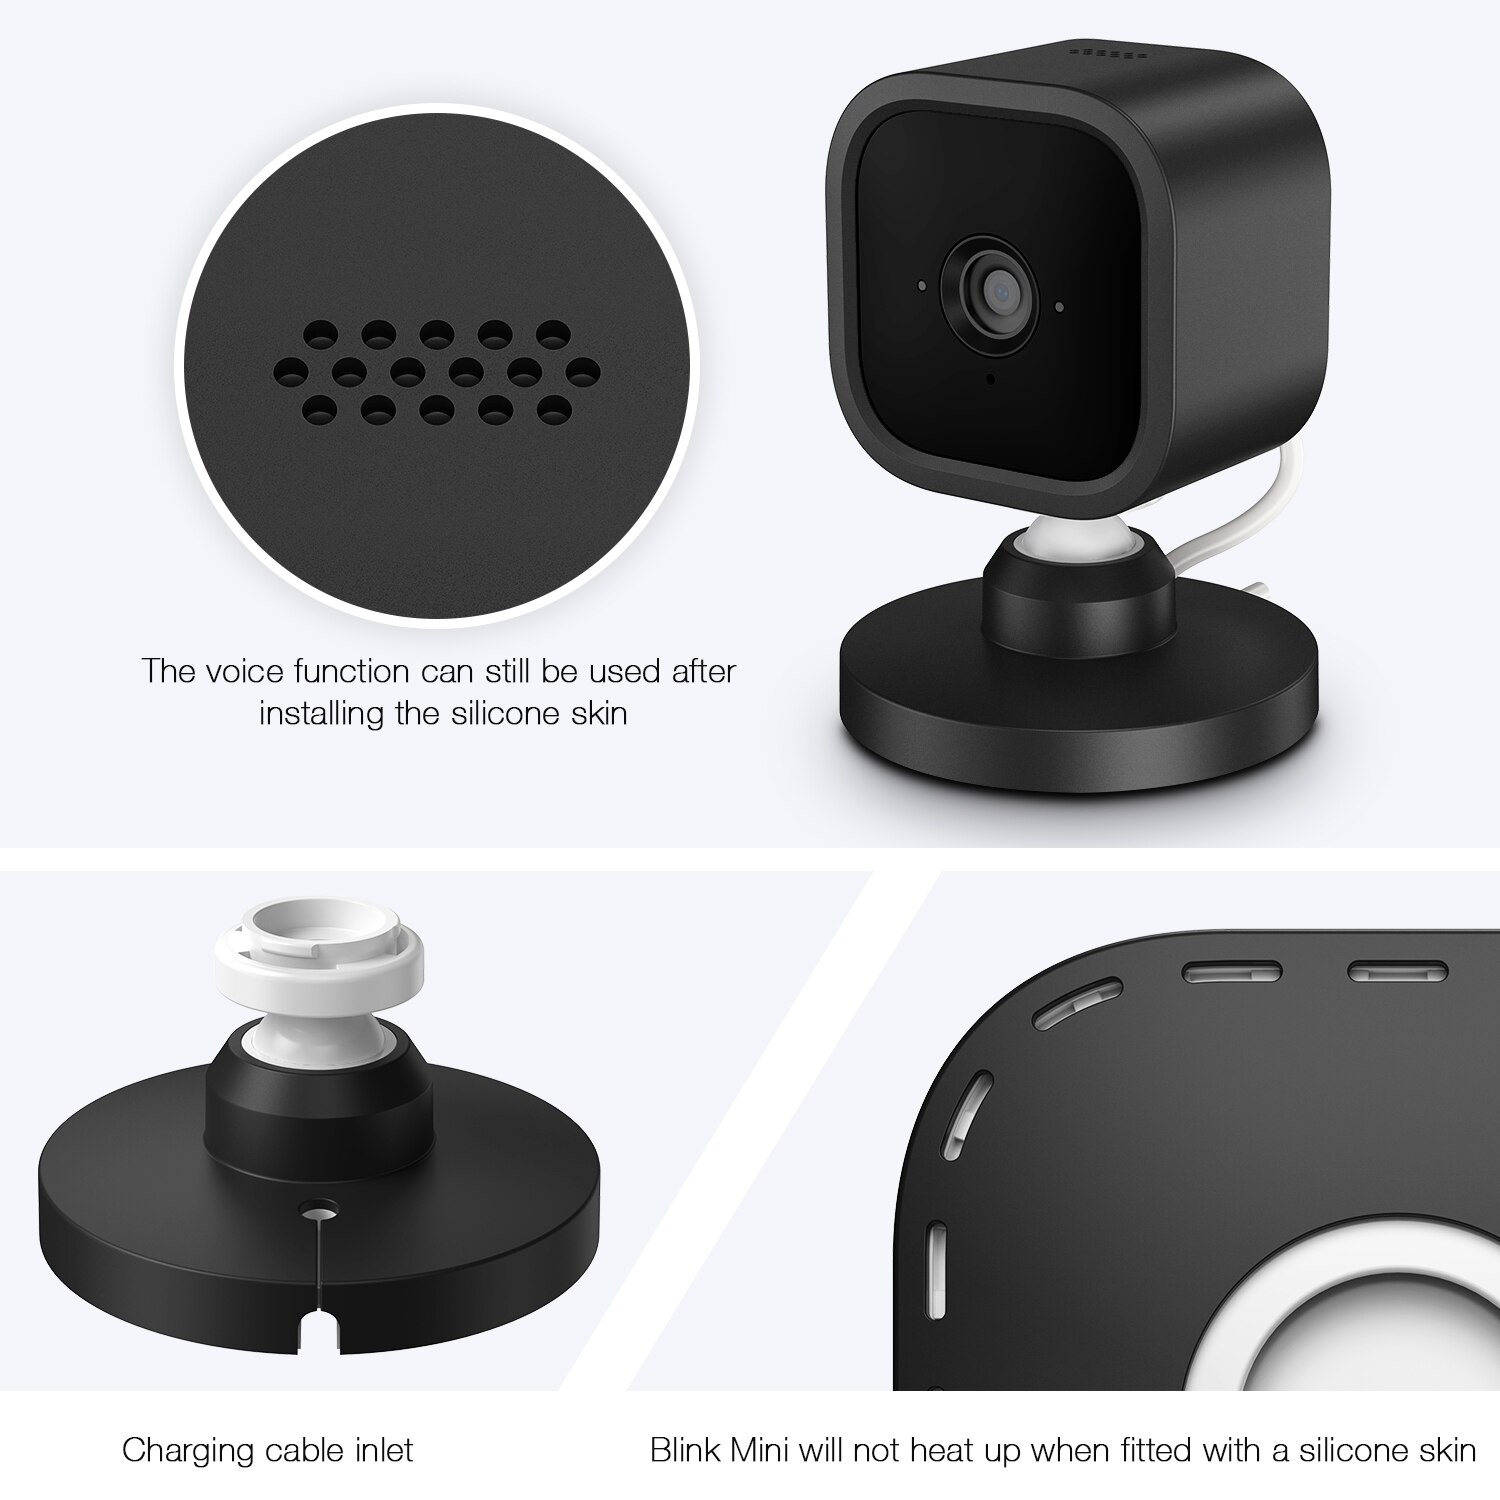 Blink Mini Camera Wall Mount Bracket Silicone Protective Covers Indoor/Outdoor Wall Mount Security Cover for Blink Mini Camera